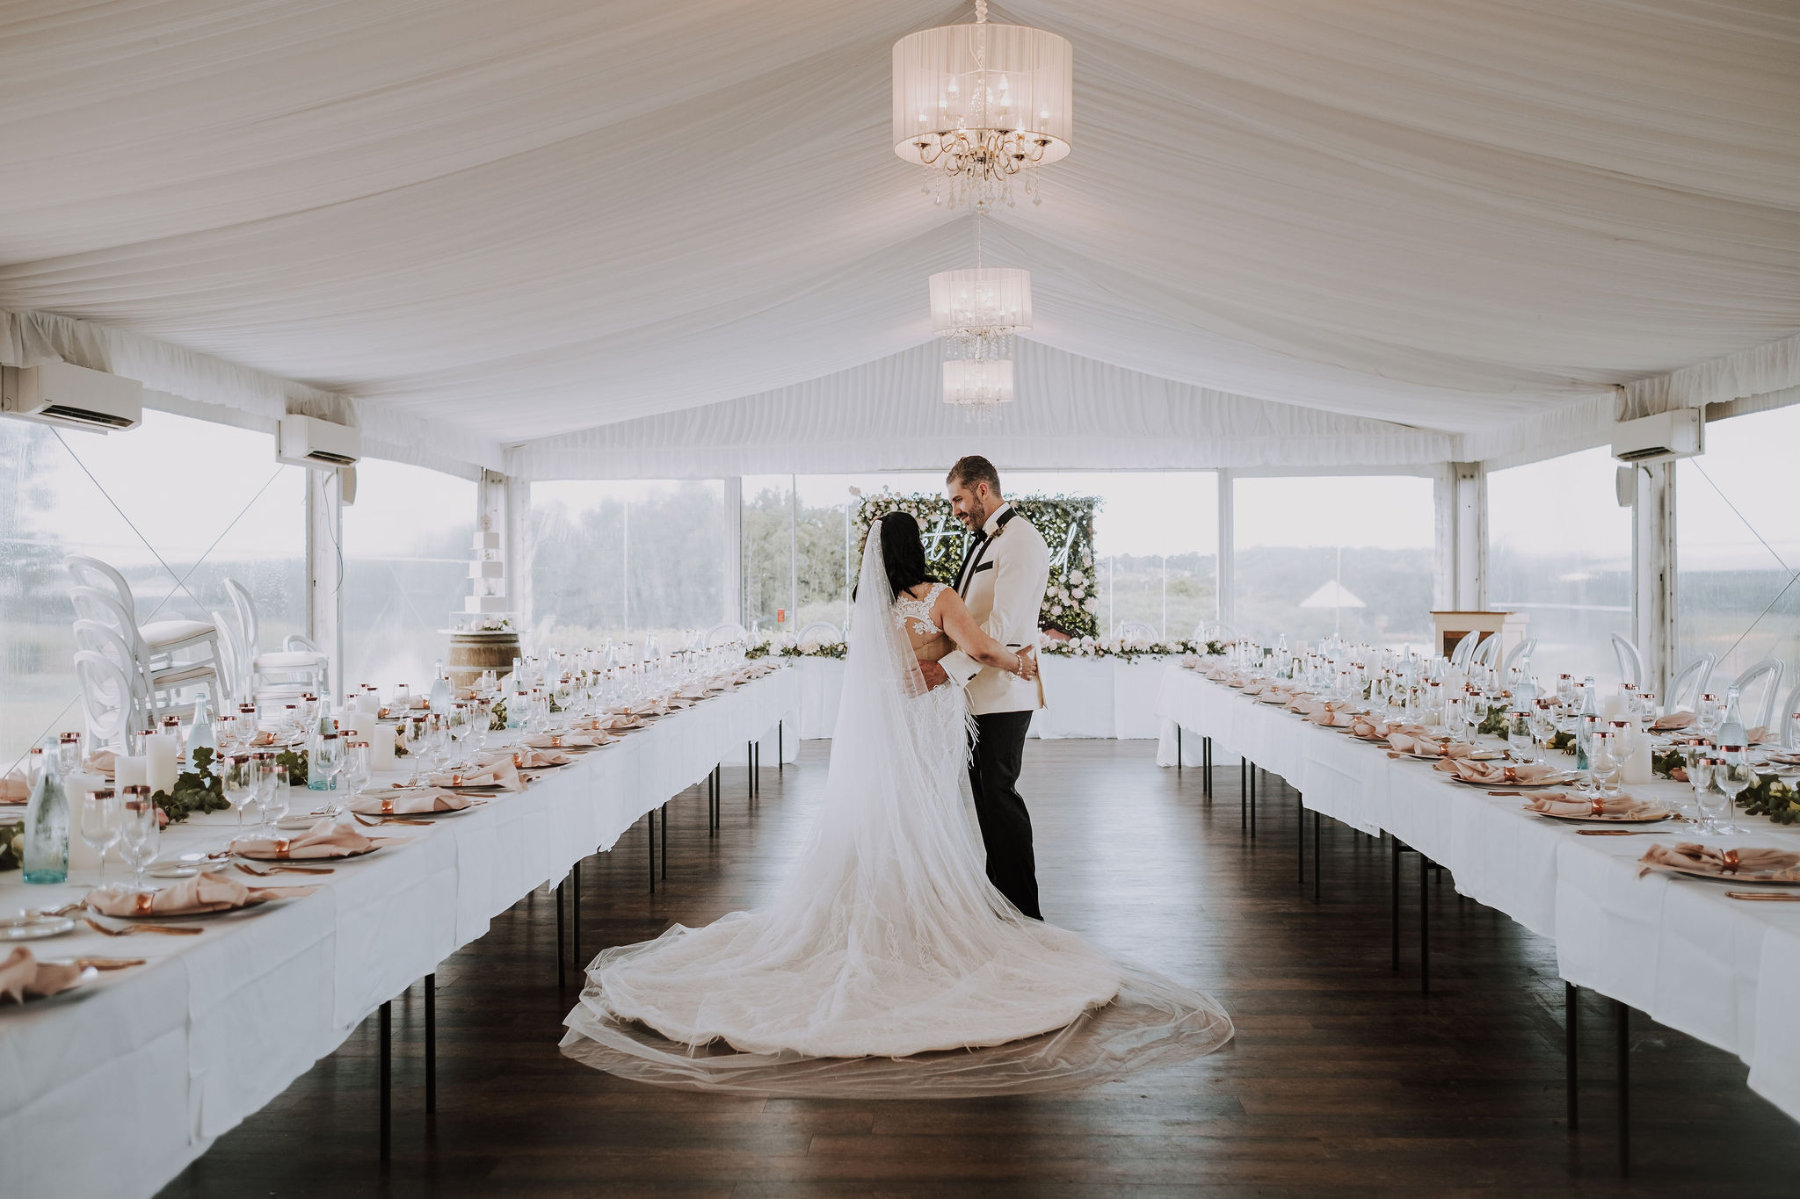 Luxury marquee wedding for Vanessa and Joe at Peterson House Hunter Valley. Planned and styled by Hunter Events NSW. Photographed by Popcorn Photography